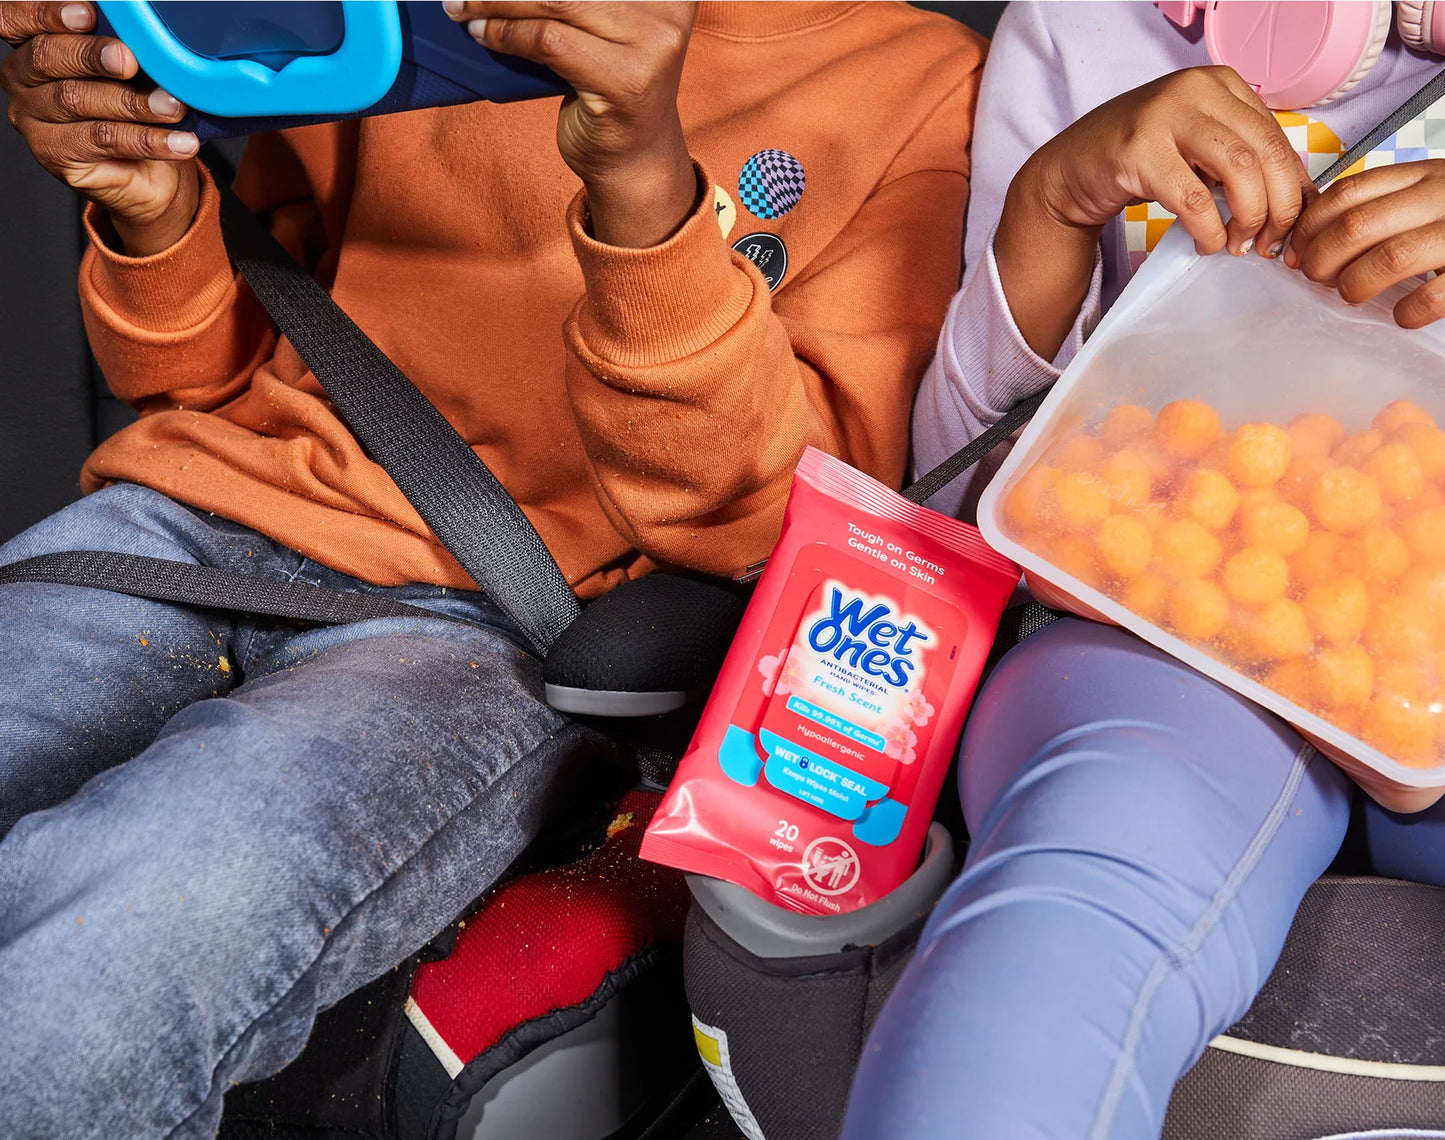 Canadian kids travel eating lunch in car with wet ones antibacterial hand wipes